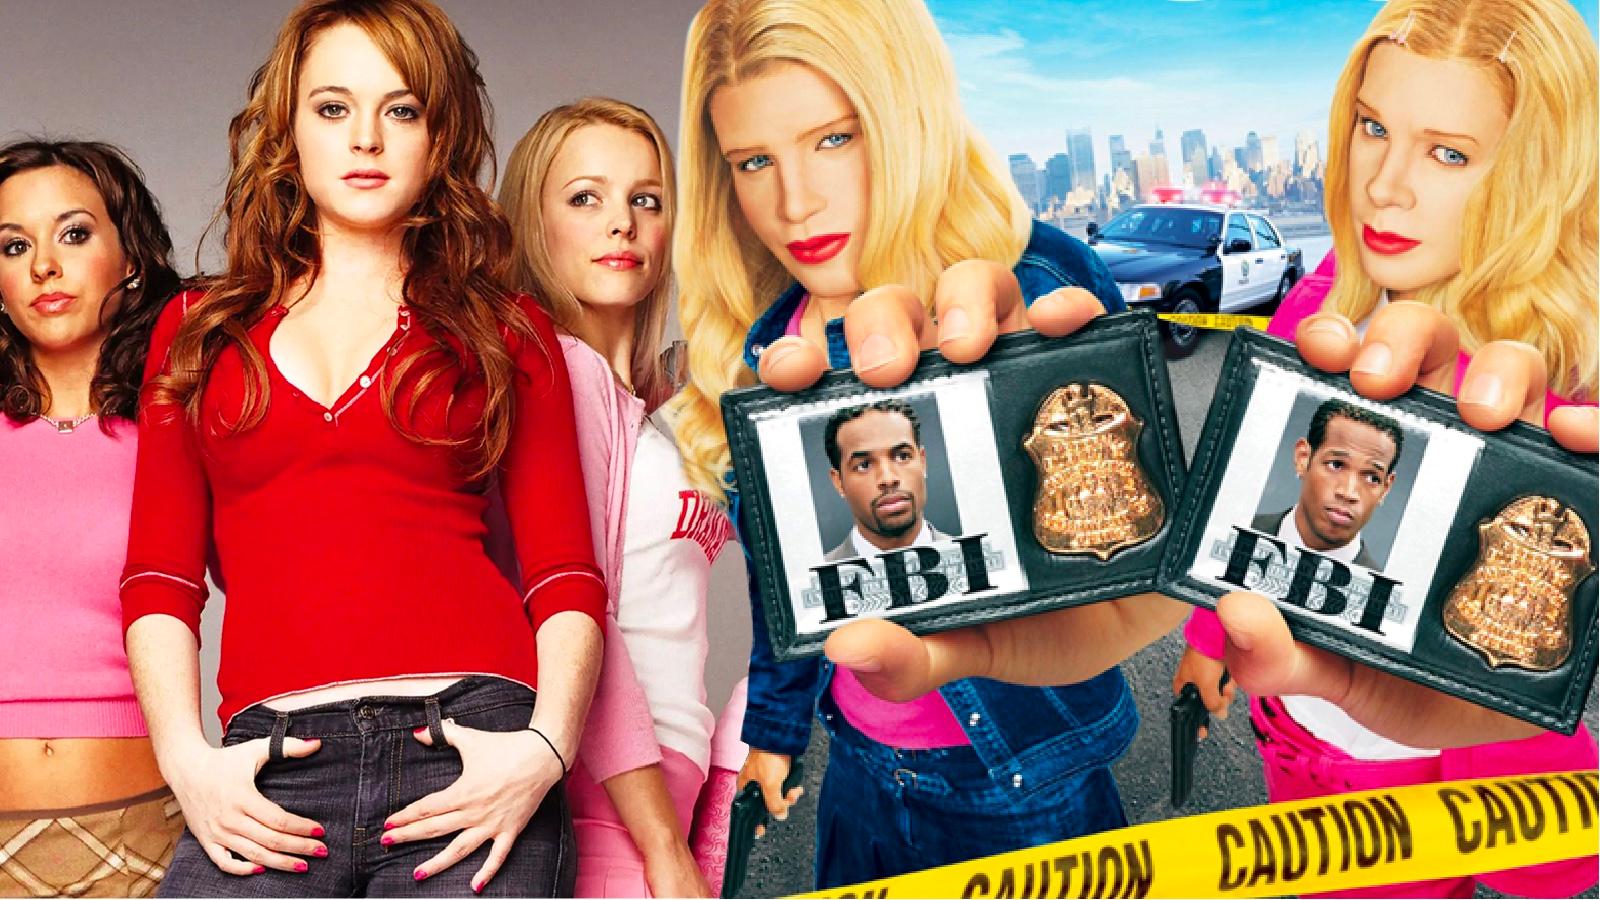 How to watch Mean Girls 2 – where is it streaming? - Dexerto